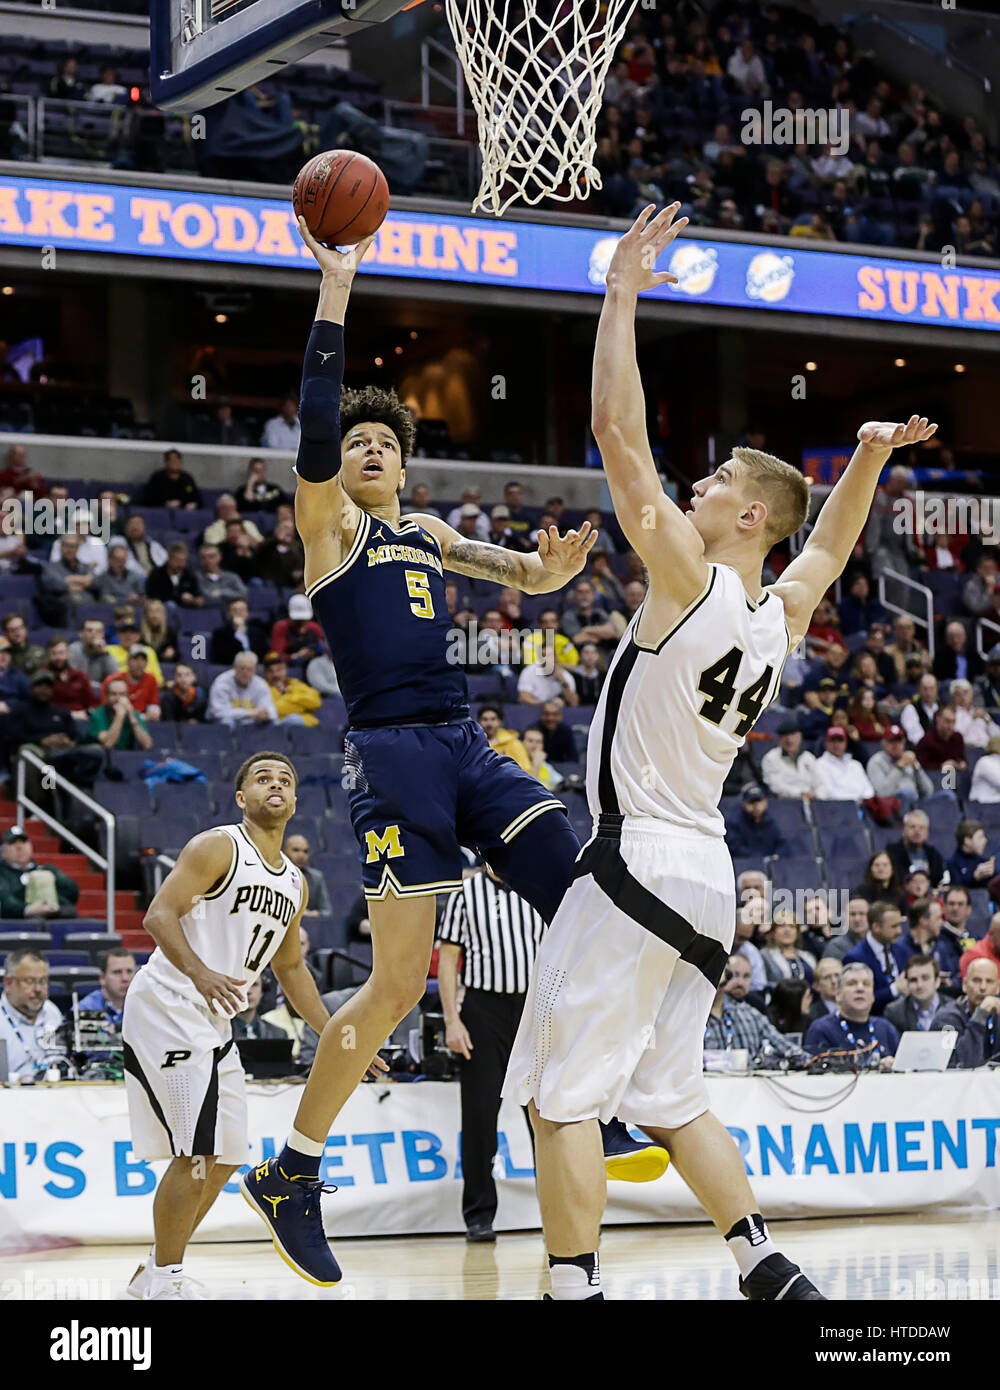 Washington, DC, USA. 10th Mar, 2017. Michigan Wolverines F #5 D.J. Wilson takes a shot under the basket in front of Purdue Boilermakers C #44 Isaac Hass during a Big 10 Men's Basketball Tournament game between the Purdue Boilermakers and the Michigan Wolverines at the Verizon Center in Washington, DC. Justin Cooper/CSM/Alamy Live News Stock Photo